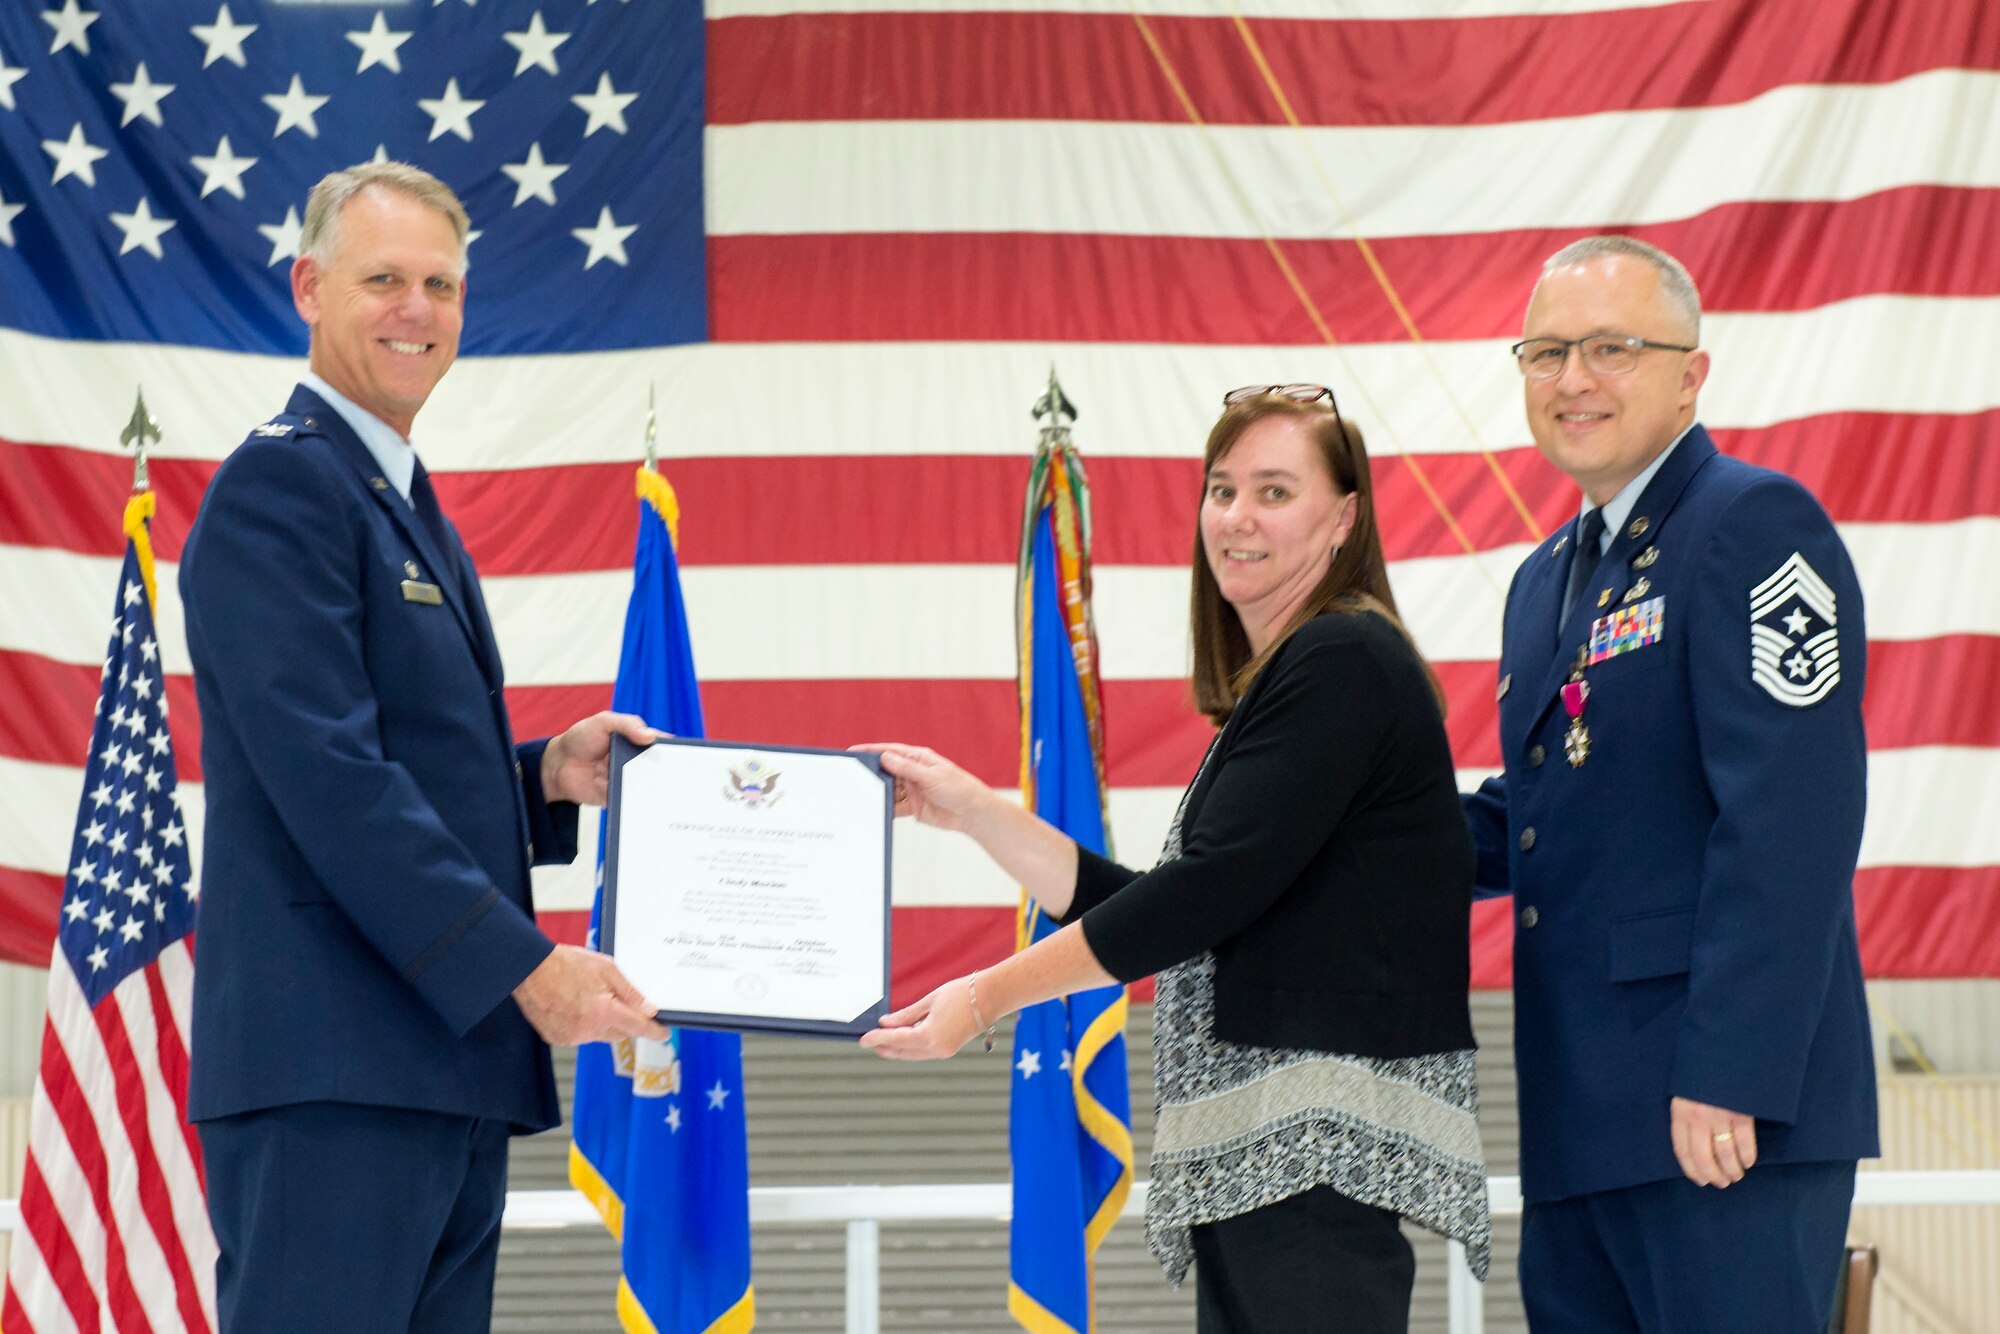 Col. Larry Shaw, 434th Air Refueling Wing commander, presents Cindy Marion, wife of Chief Master Sgt. Wes Marion, 434th ARW command chief, with a certificate of appreciation during her husband’s retirement ceremony at Grissom Air Reserve Base, Ind., Nov. 8, 2020. In addition to supporting her husband’s military career, Cindy supported all of Grissom Airman by serving in the Key Spouse program since 2016 as a Key Spouse Wing mentor. (U.S. Air Force photo/Master Sgt. Ben Mota)